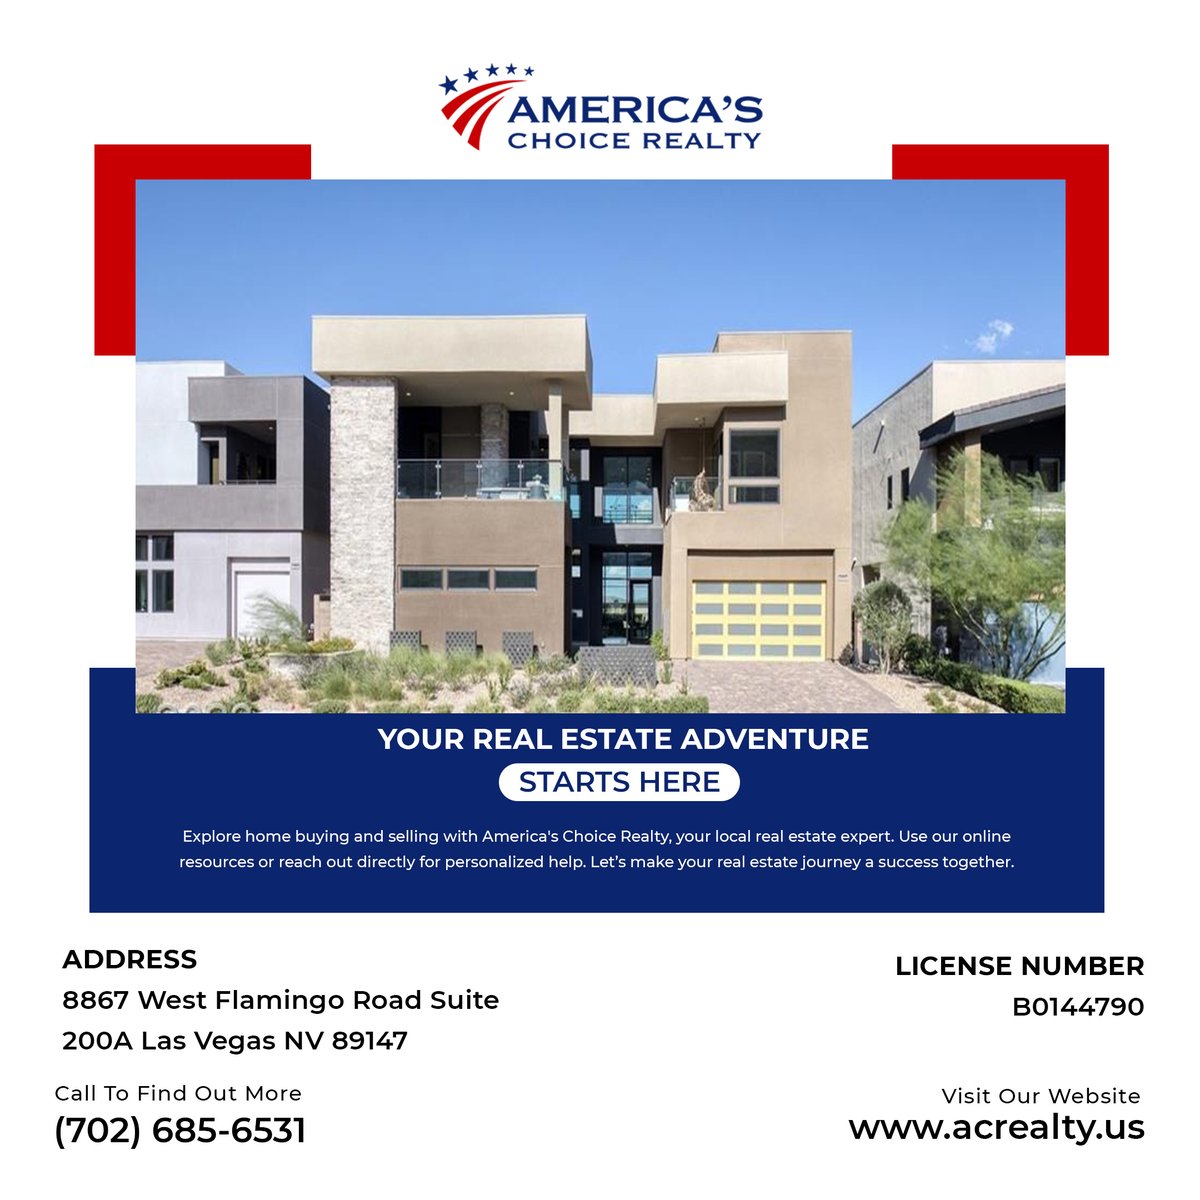 Start your real estate career right now. With our professional advice and individualized attention, find your ideal residence.
..

.
.
.
.
#realestateusa #realestate #realestateagent #realestateinvesting #realestatelife #realestateinvestor #realestatebroker #realestategoals